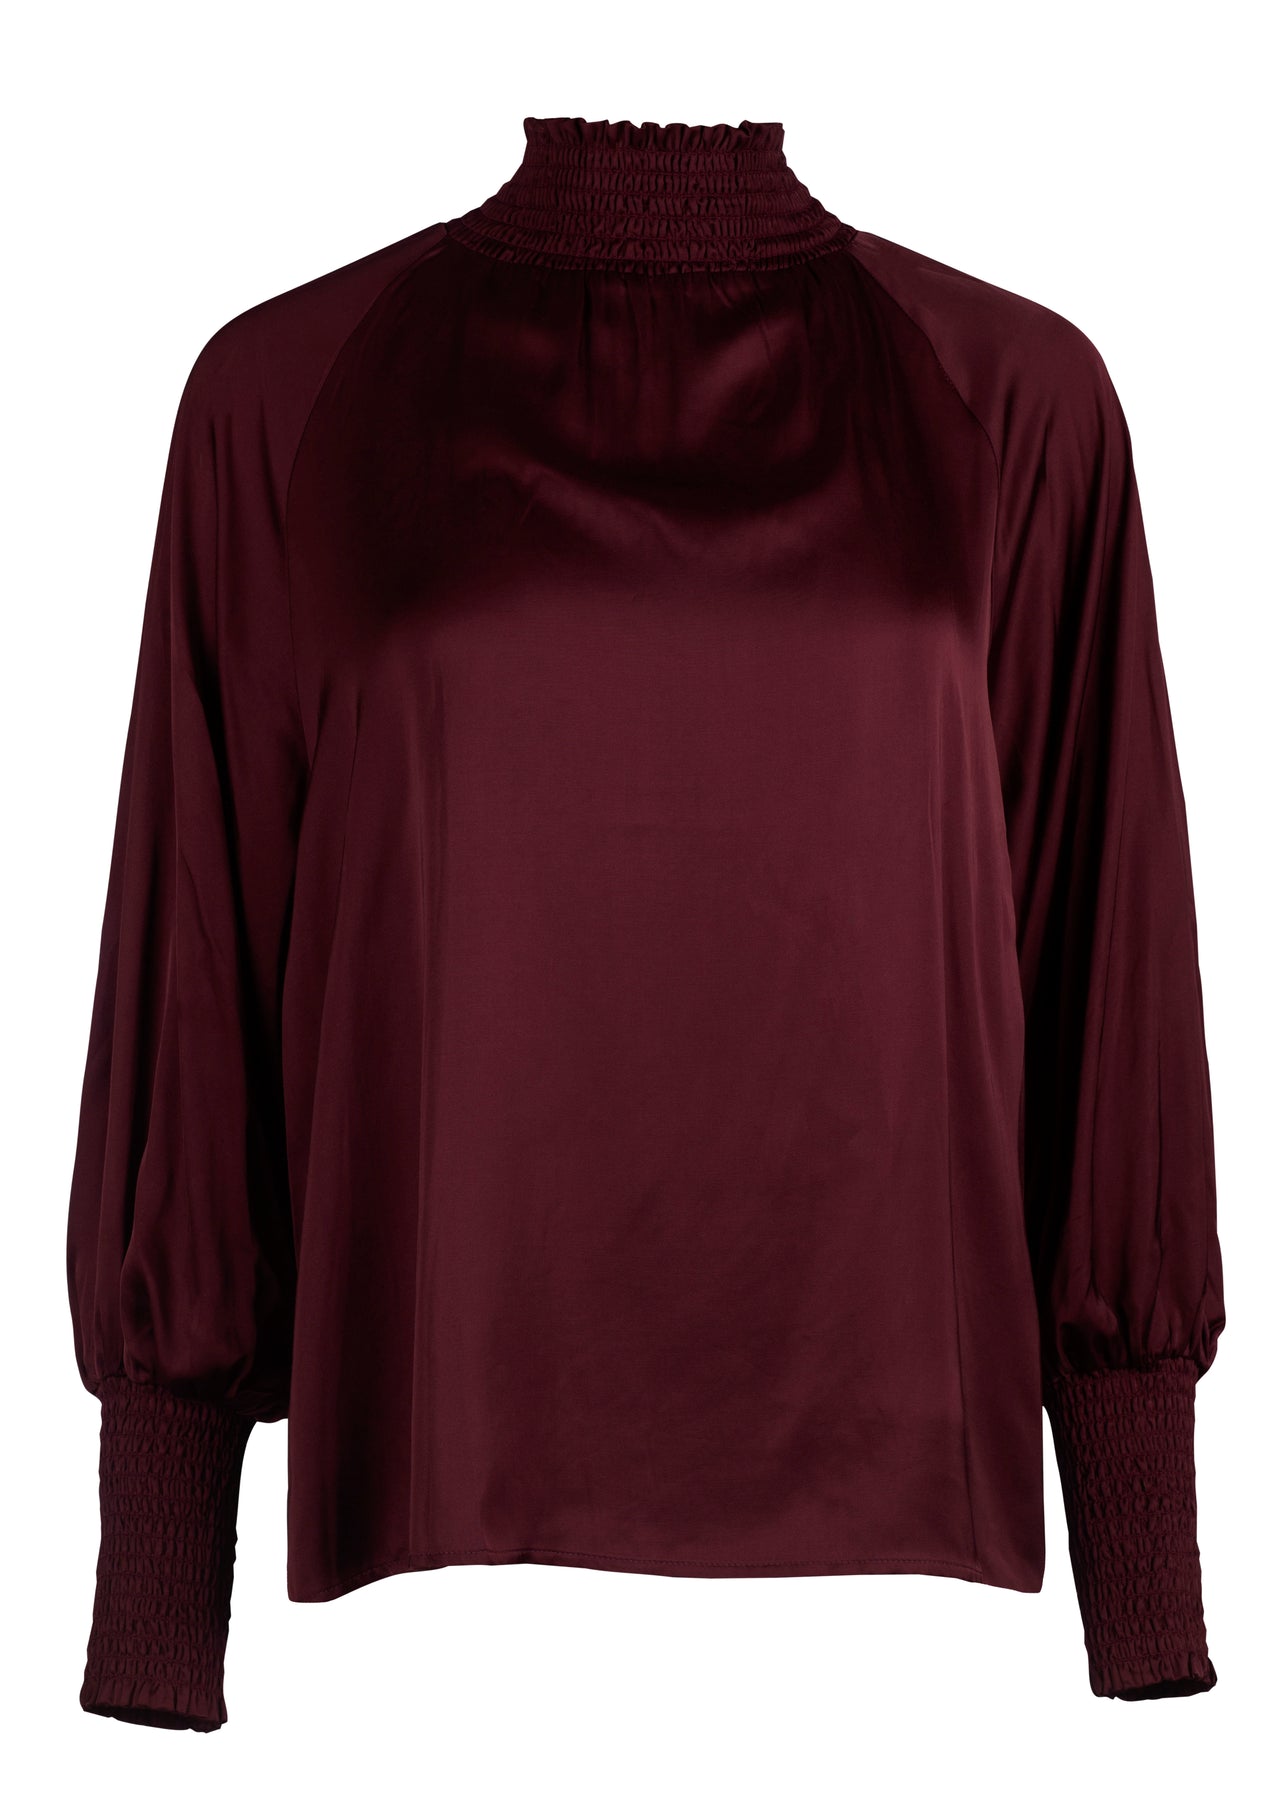 Dione Blouse - Deep Wine - By Malina - Bluser & Skjorter - VILLOID.no